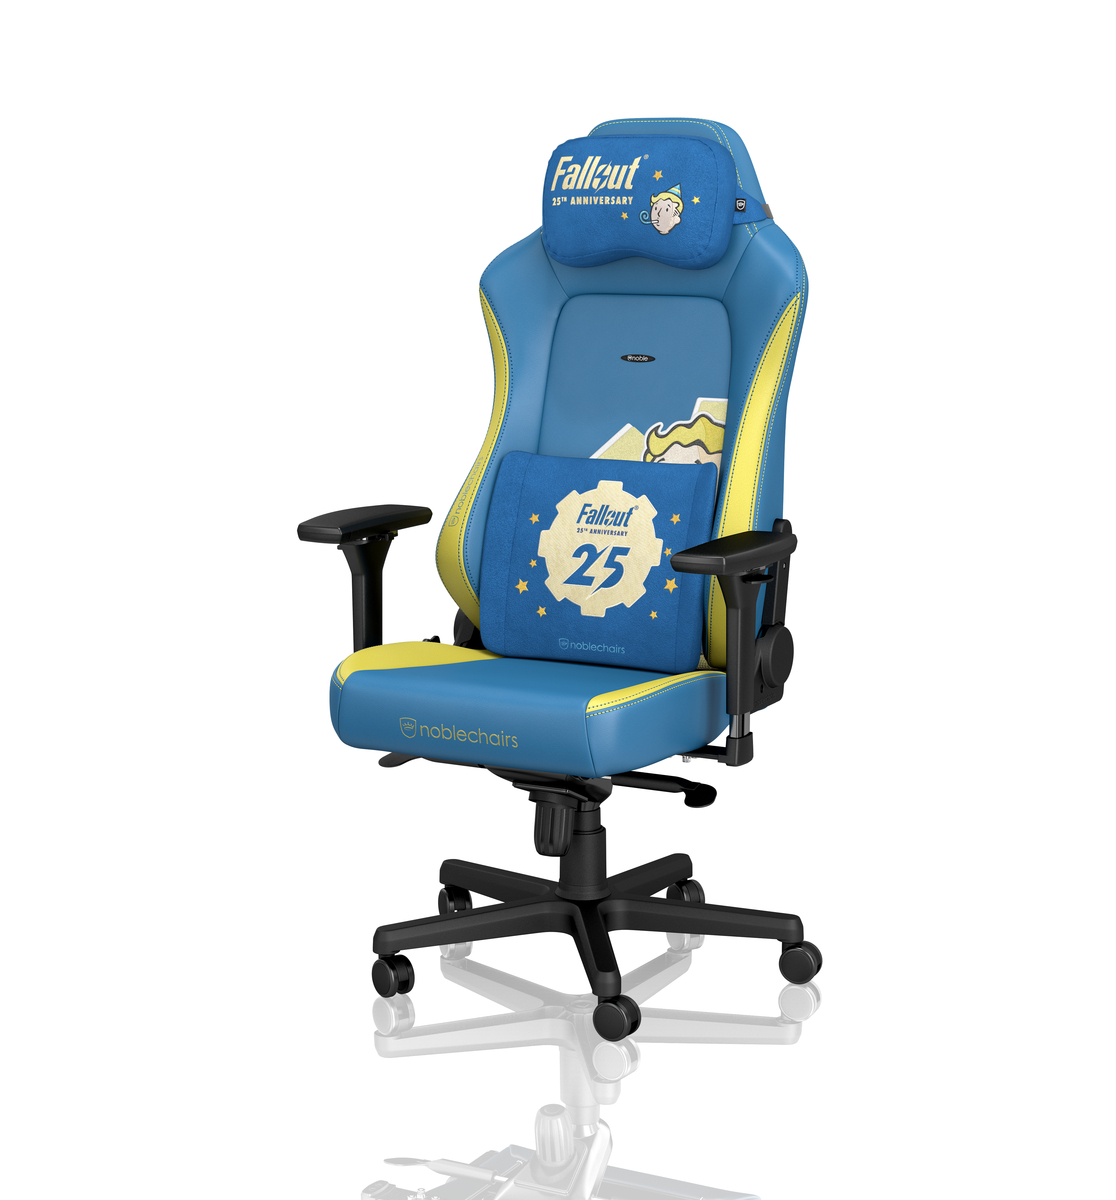 noblechairs Memory Foam Pillow-Set - Fallout 25th Anniversary Edition